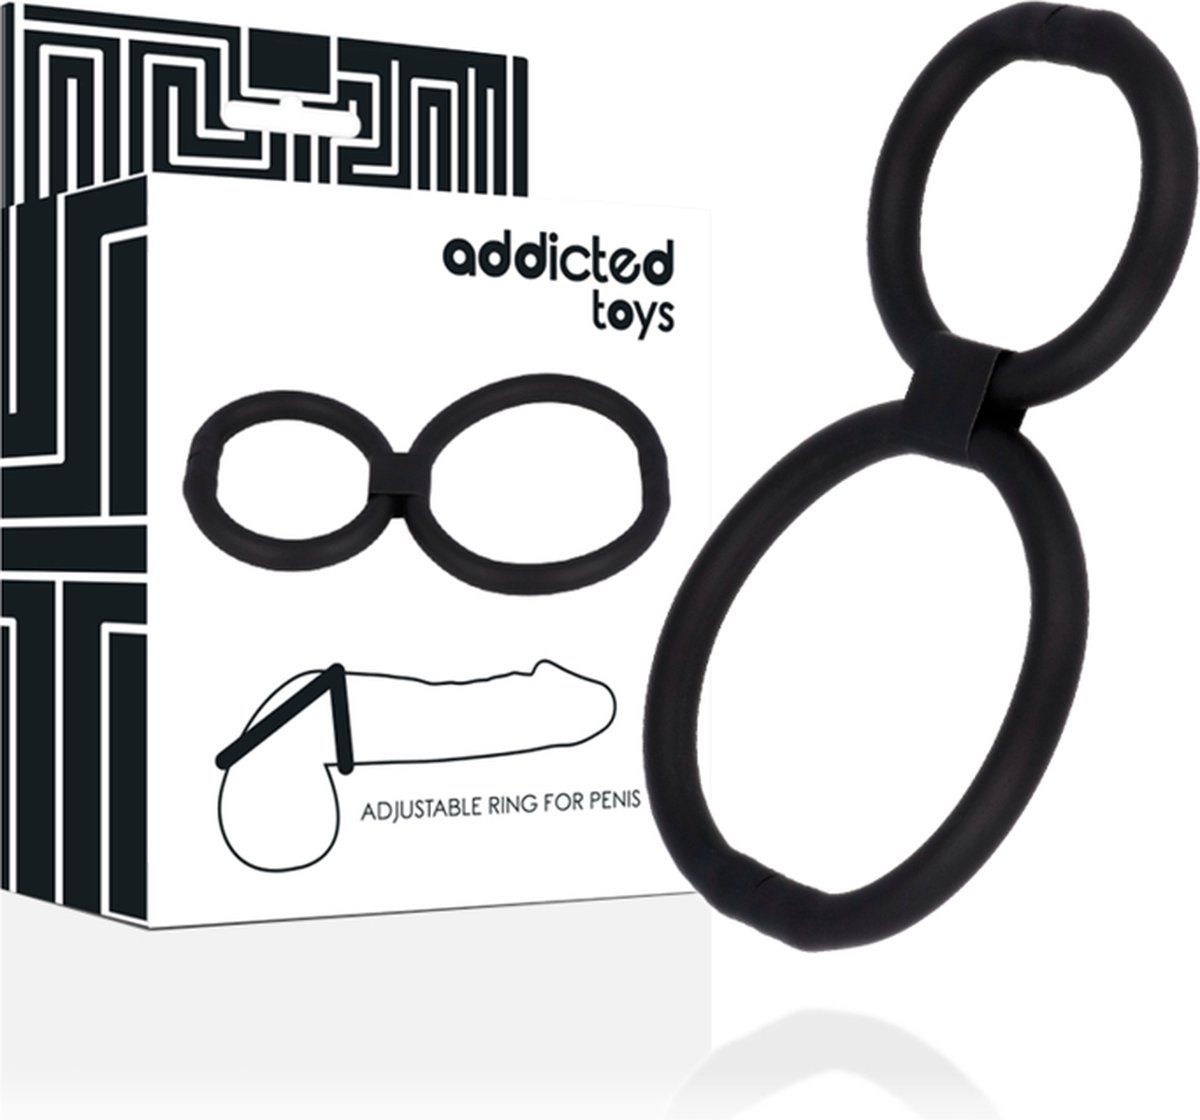 ADDICTED TOYS | Addicted Toys Adjustable Rings For Penis